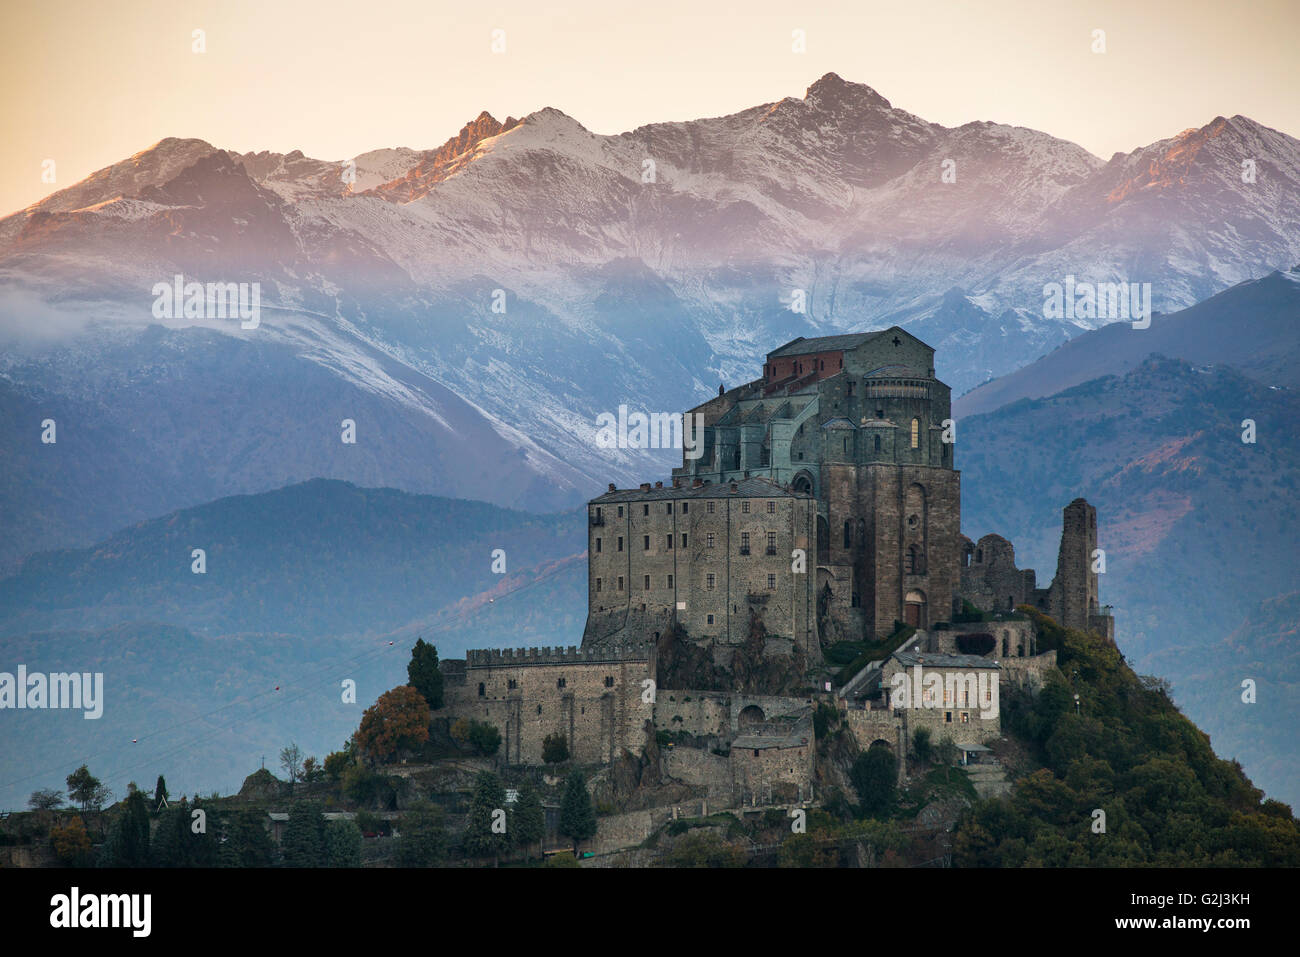 Sacra di San Michele at Sunset with Alps in Background, Italy Stock Photo